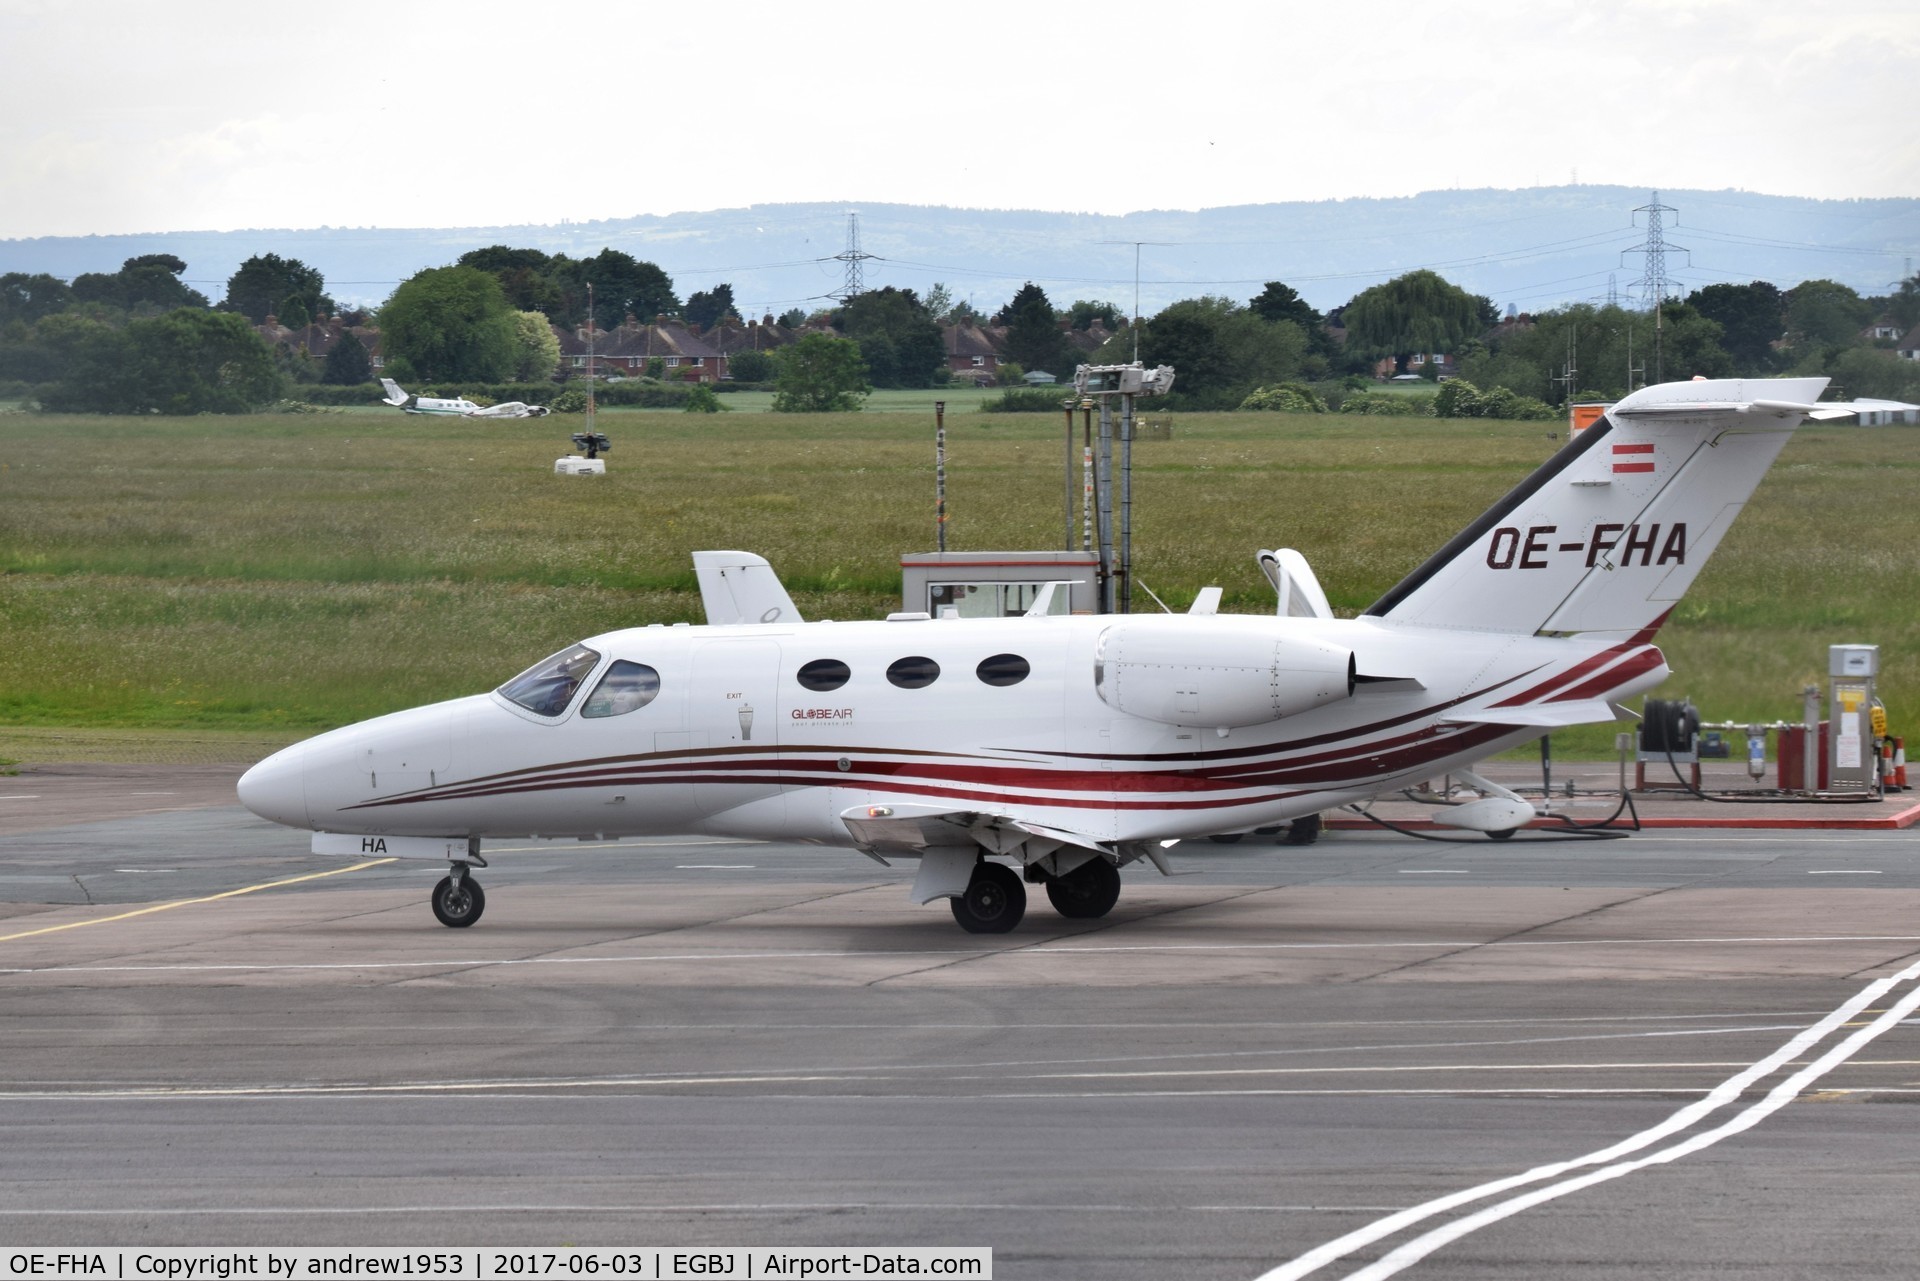 OE-FHA, 2008 Cessna 510 Citation Mustang Citation Mustang C/N 510-0081, OE-FHA at Gloucestershire Airport.